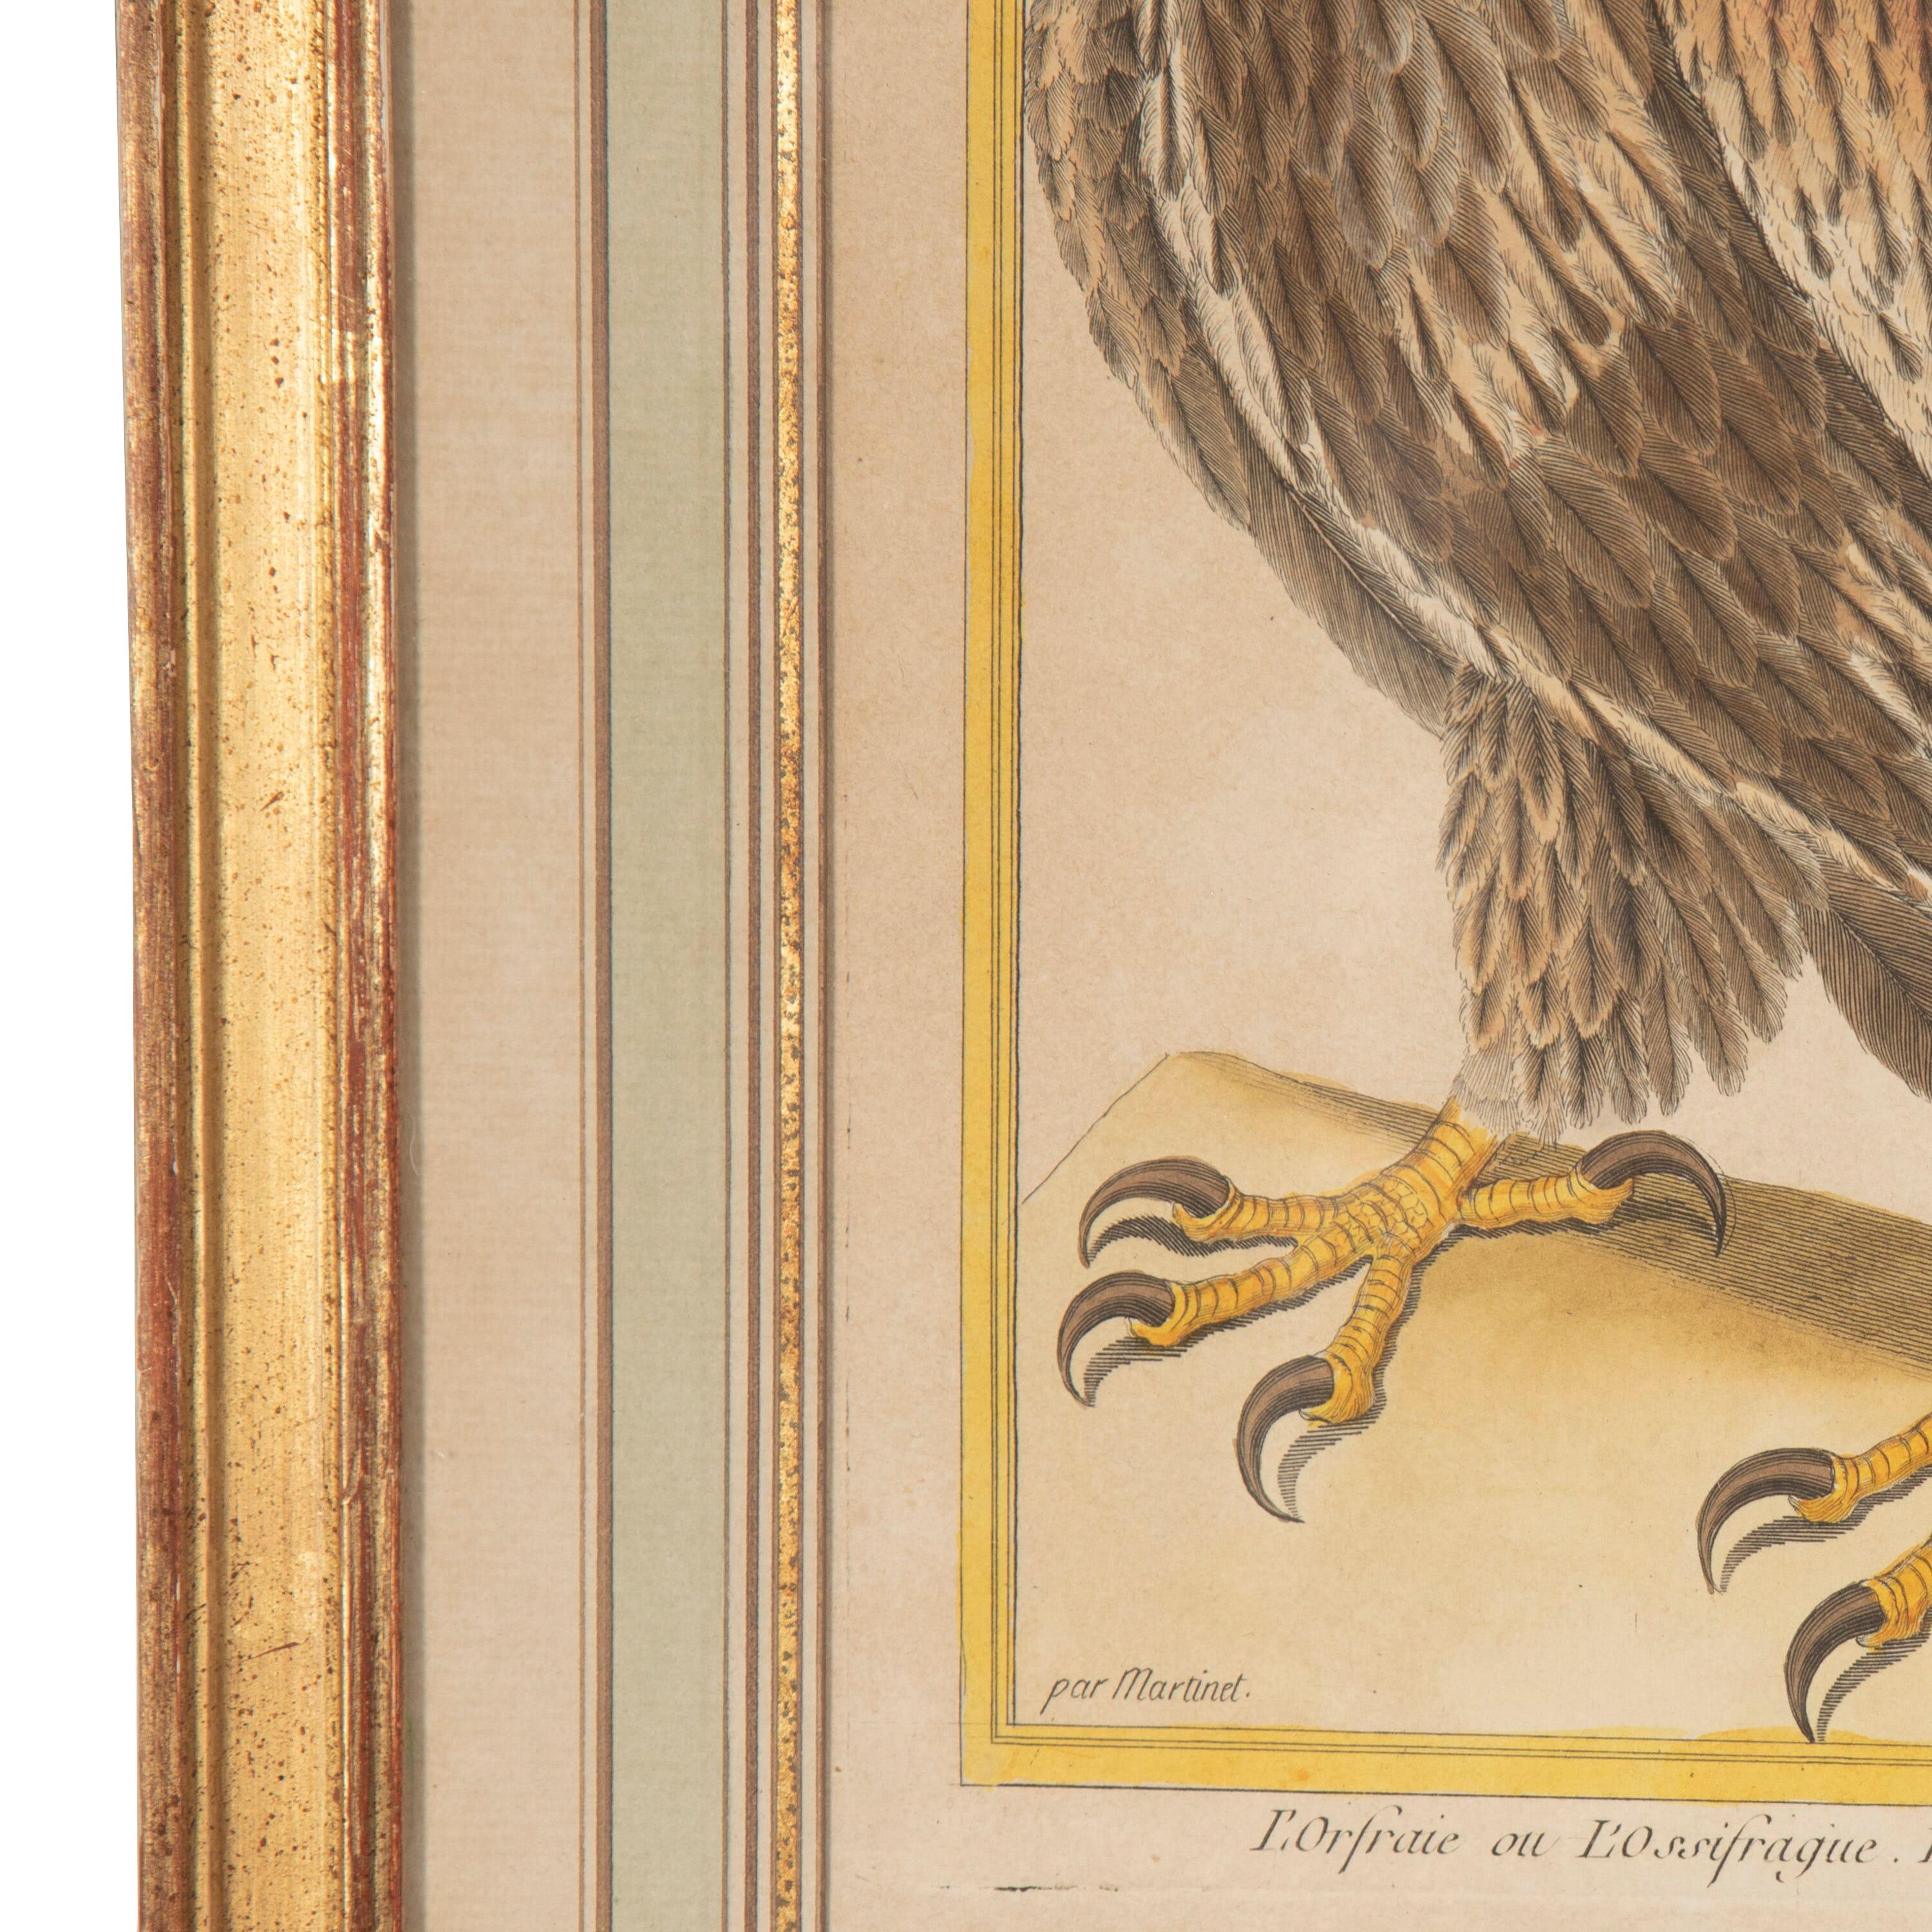 Lovely set of four hand-colored copperplate engravings, by Nicholas Martinet. 
These engravigns are from the Histoire Naturelle des Oiseaux, Paris Imprimerie Royale, by Le Comte de Buffon Georges- Louis Marie Leclerc. 
The engravings are by